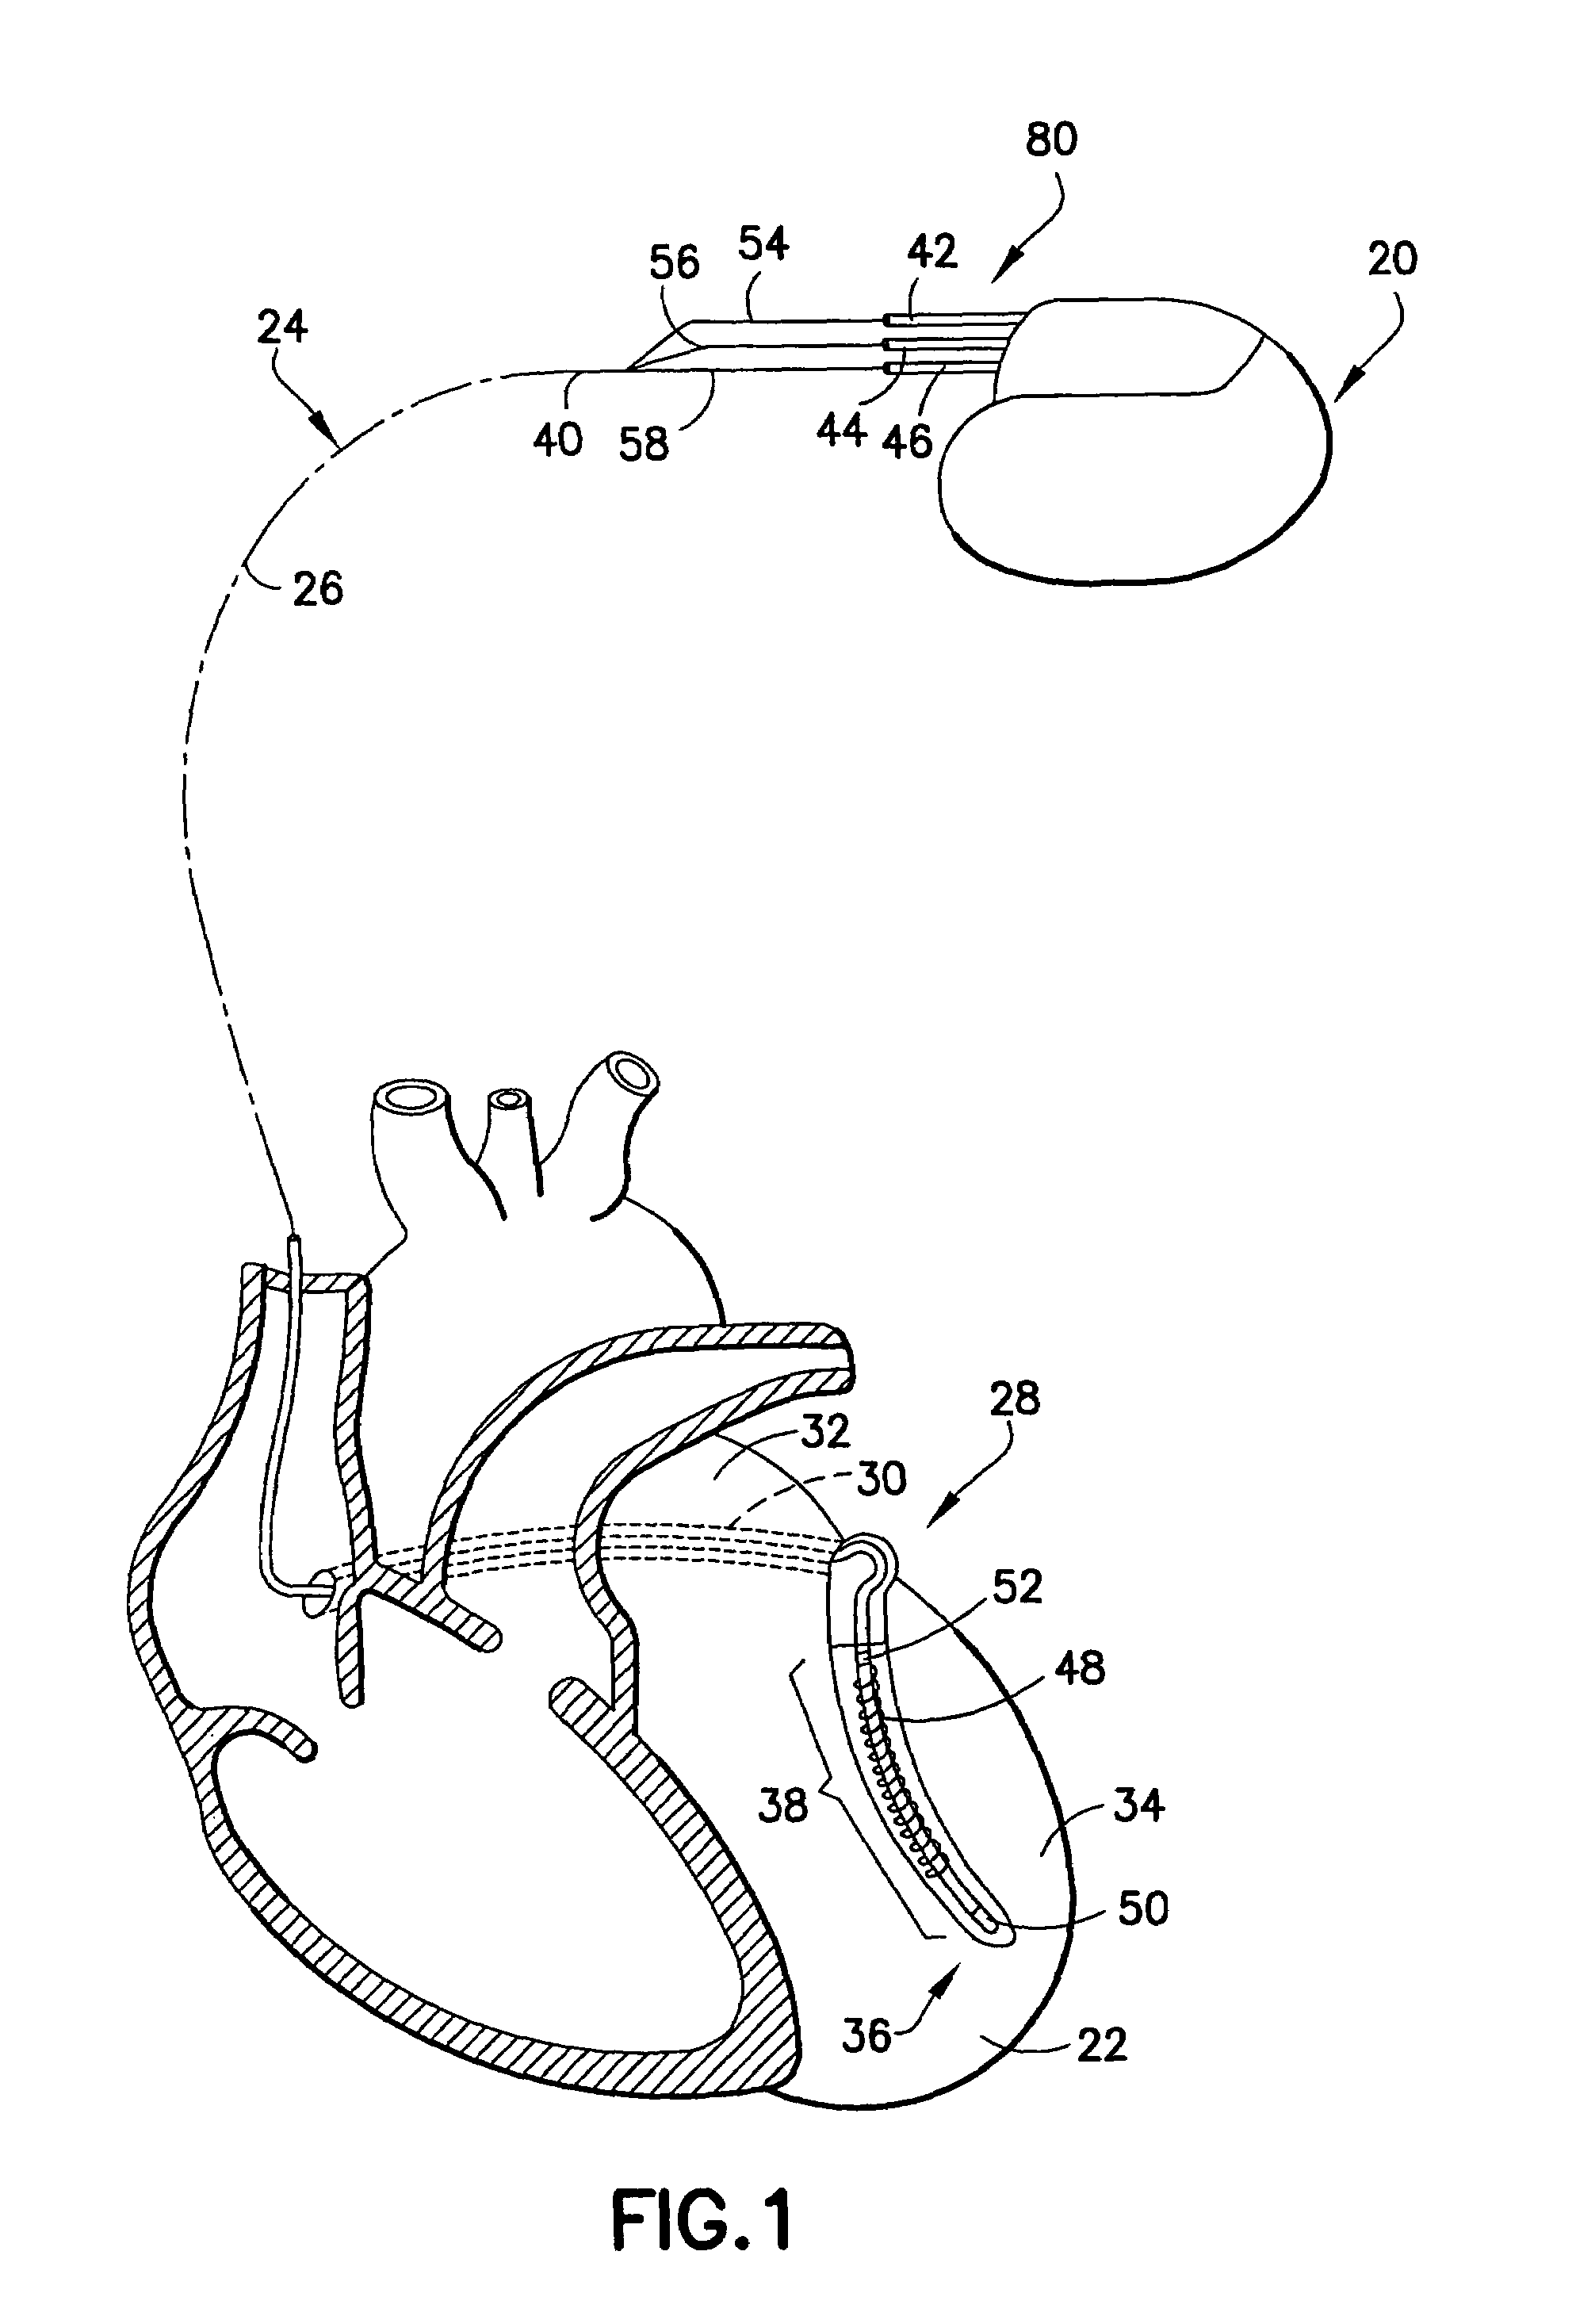 Super plastic design for CHF pacemaker lead